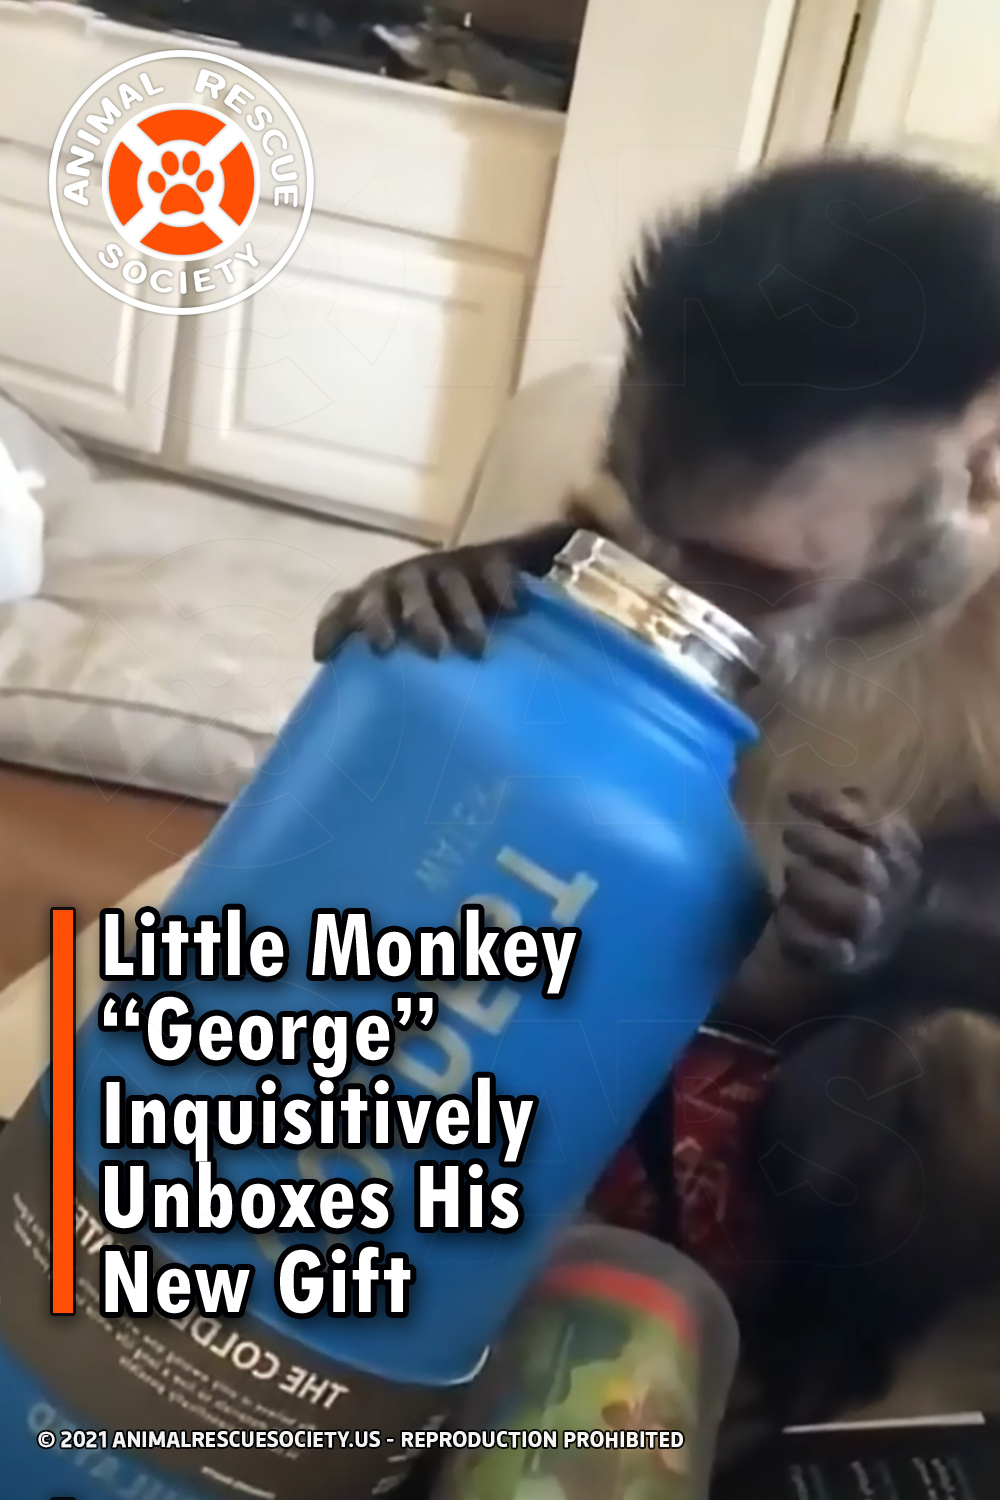 Little Monkey “George” Inquisitively Unboxes His New Gift